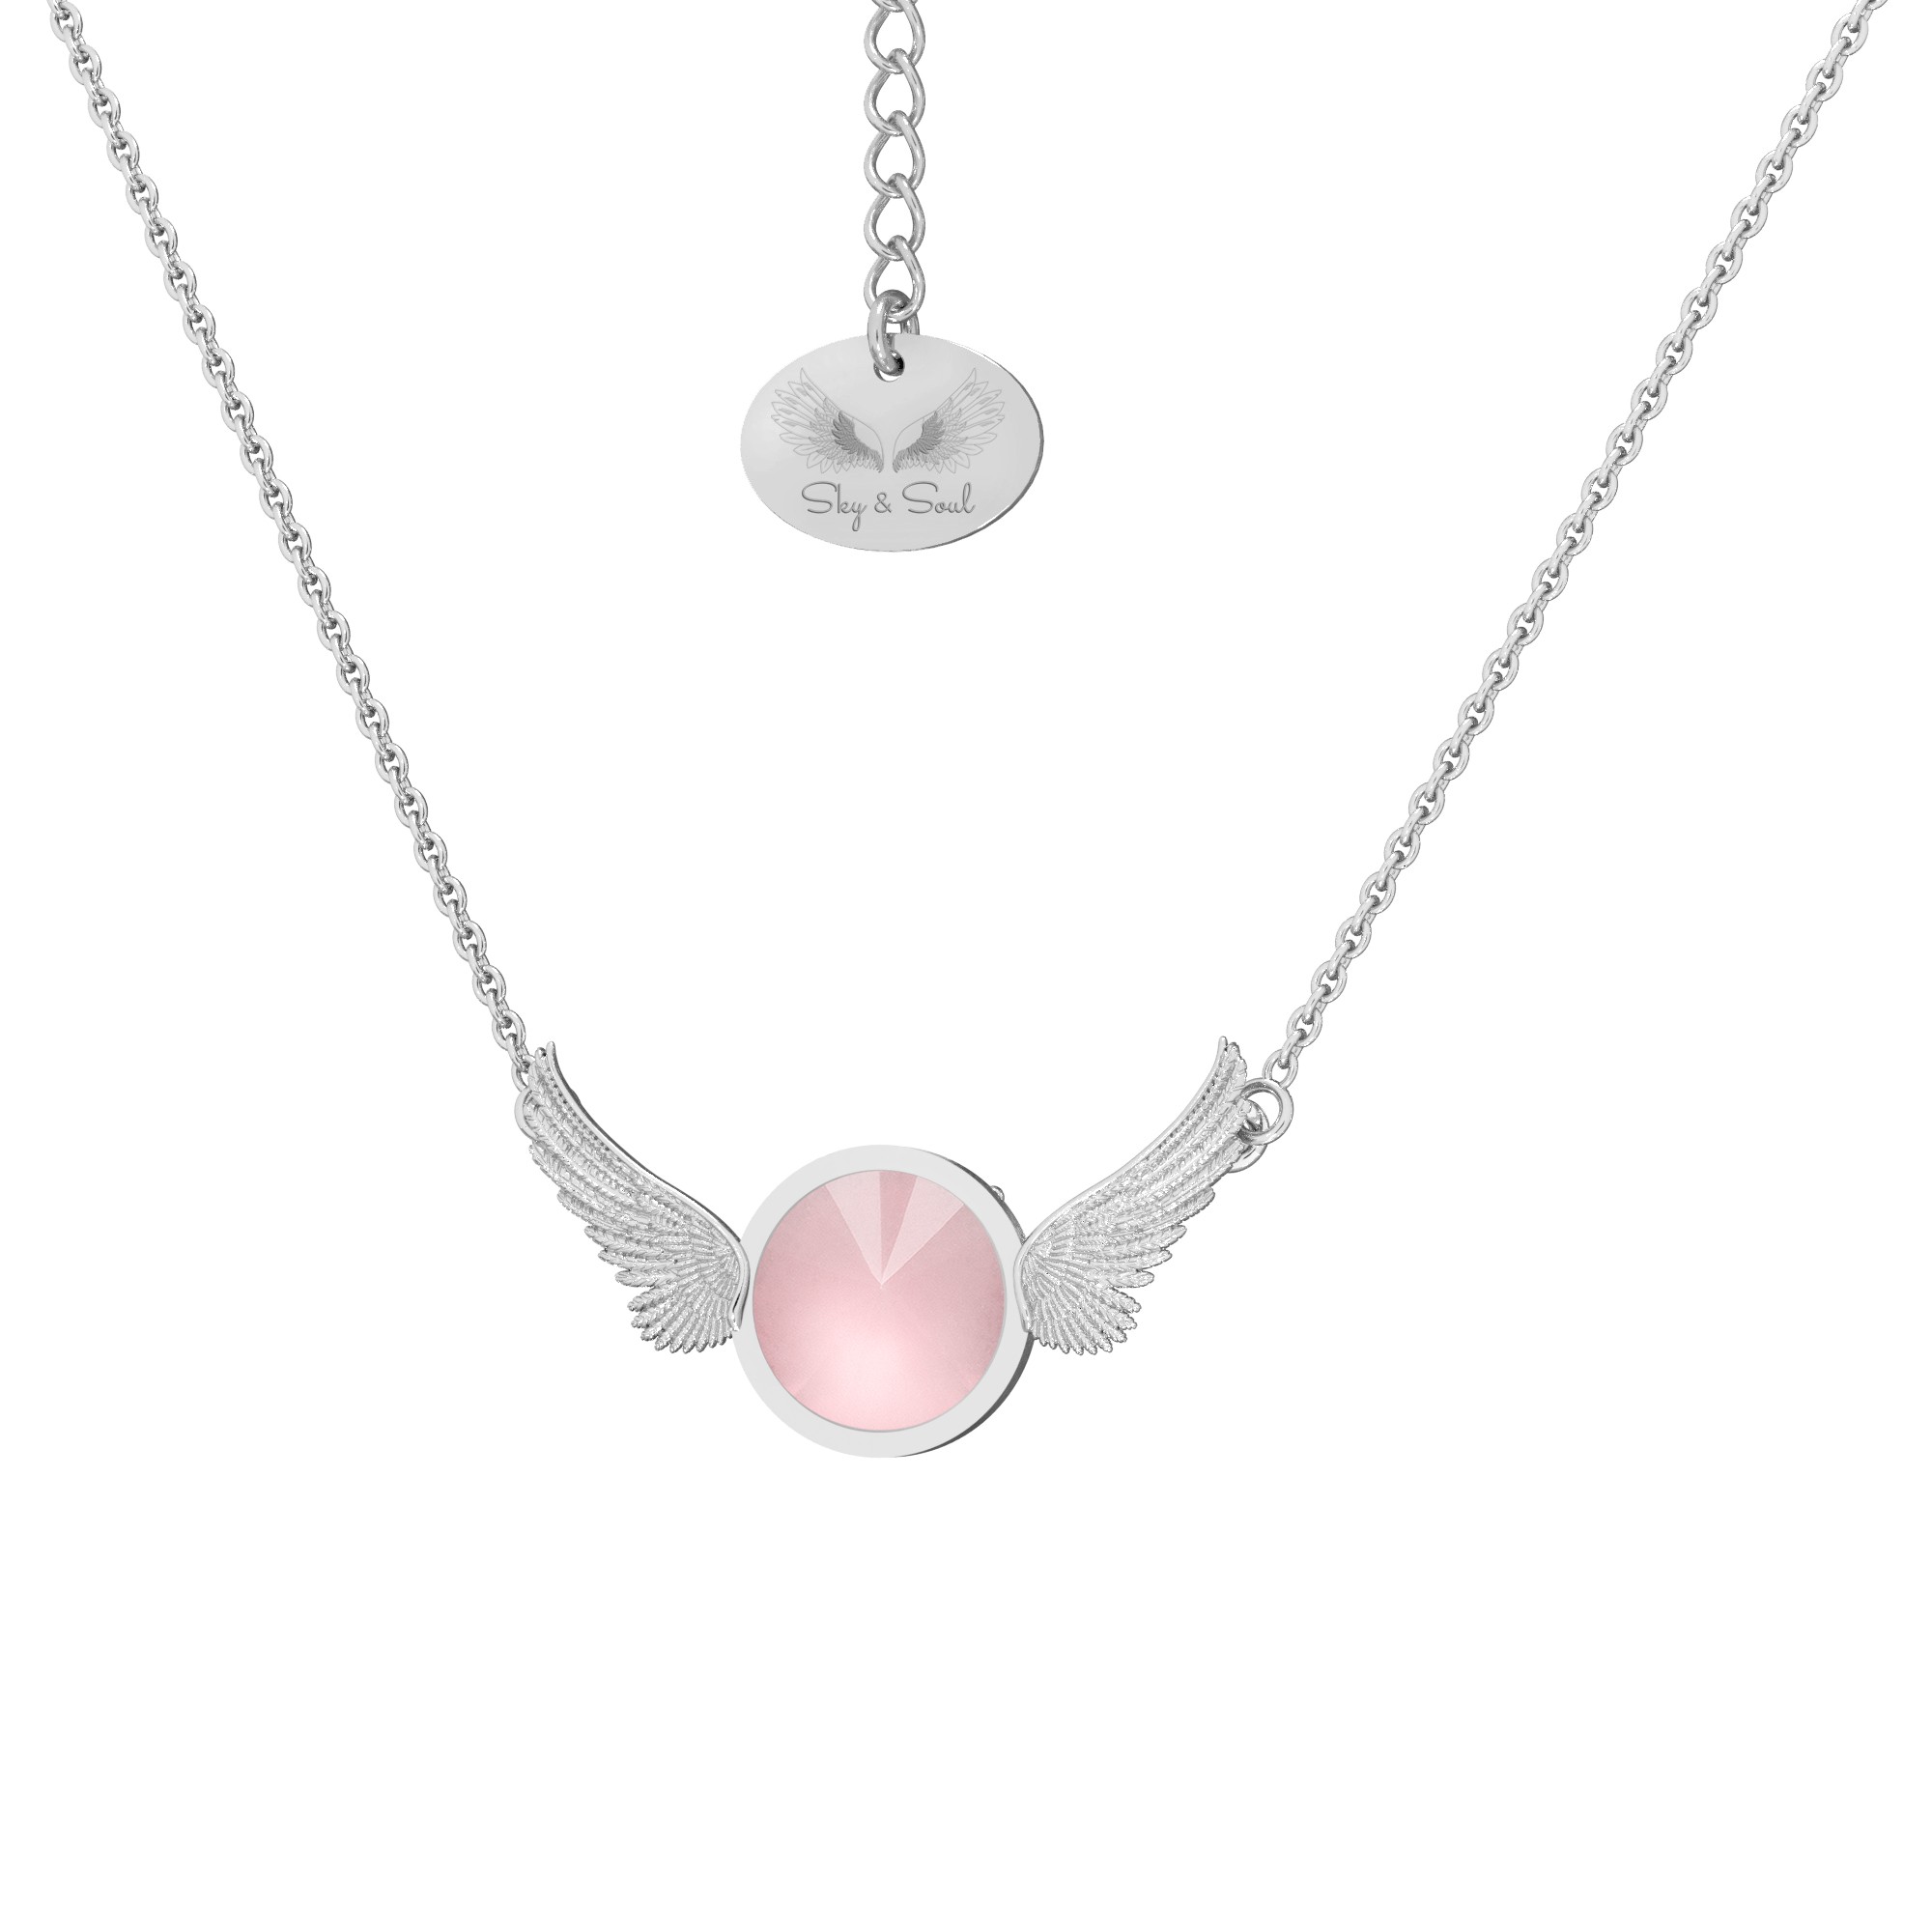 Wings necklace with natural pink stone, Sky&Soul, sterling silver 925